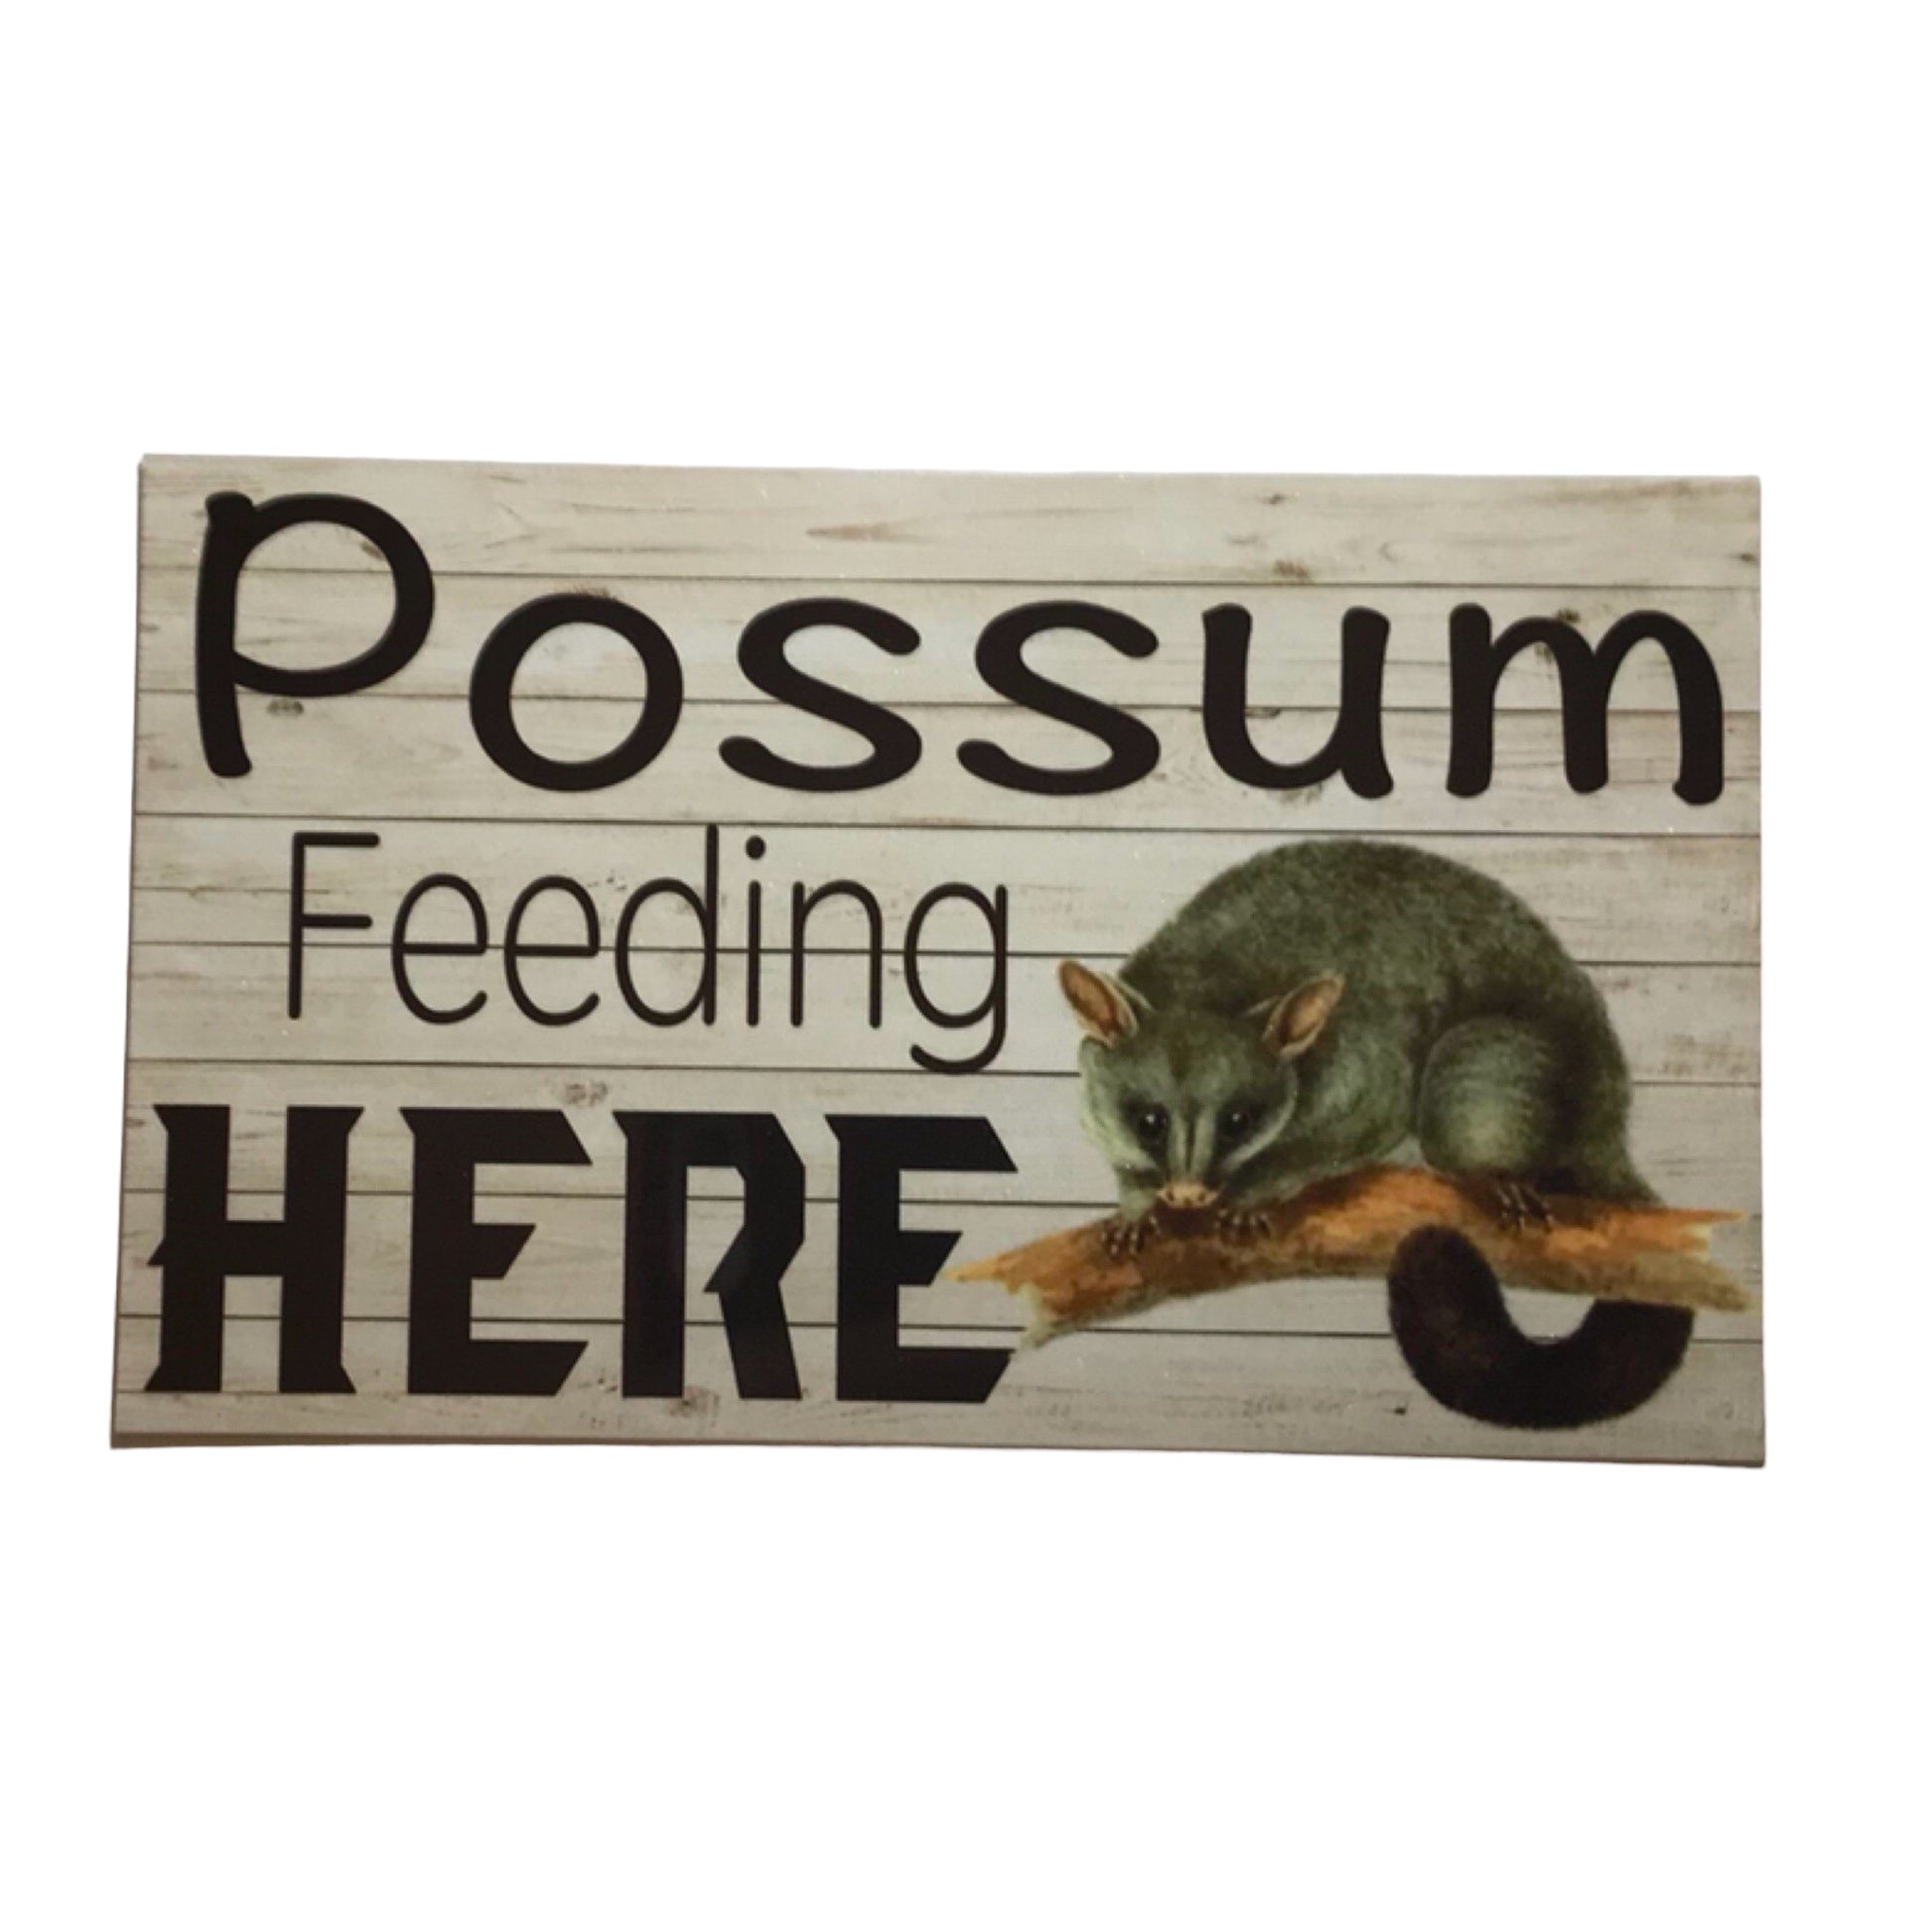 Possum Feeding Here Sign - The Renmy Store Homewares & Gifts 